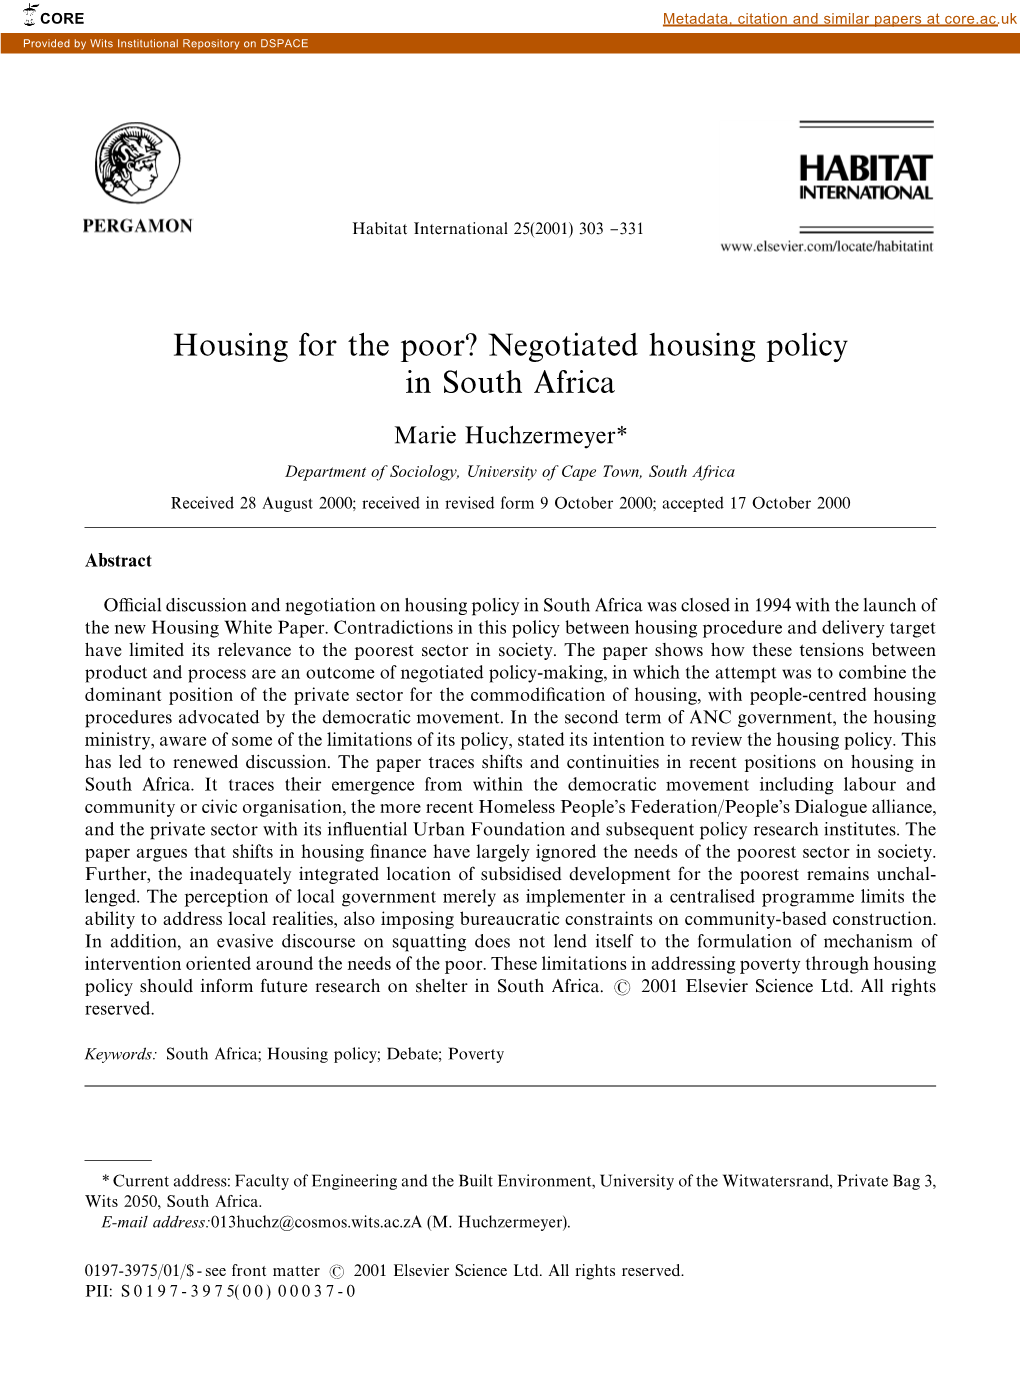 Negotiated Housing Policy in South Africa